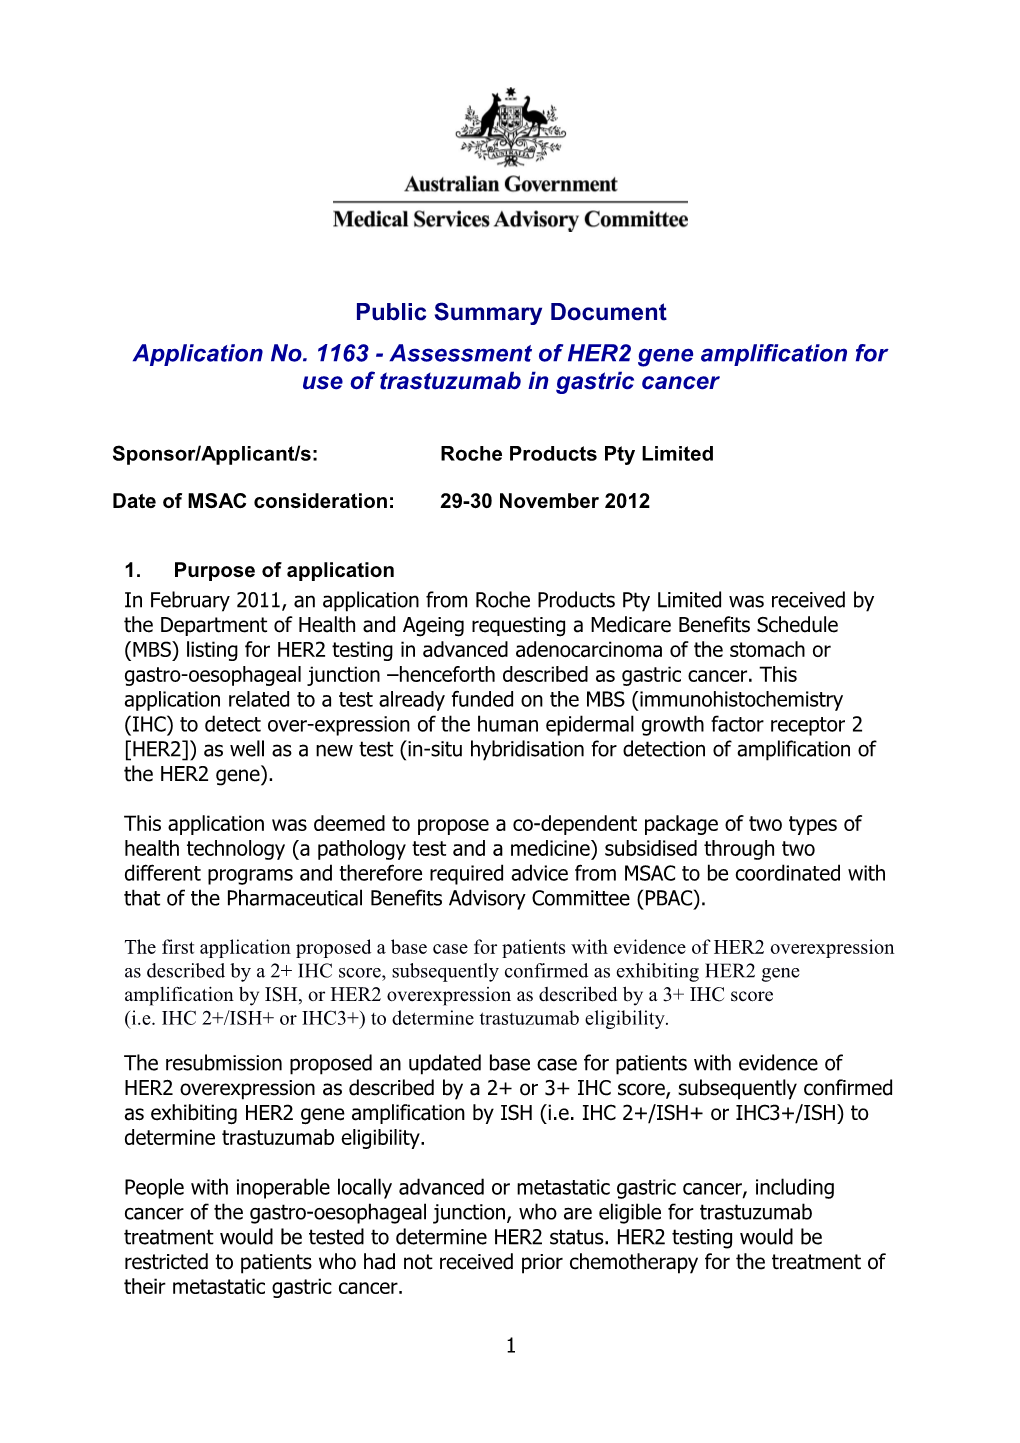 Application No. 1163 - Assessment of HER2 Gene Amplificationfor Use of Trastuzumab In